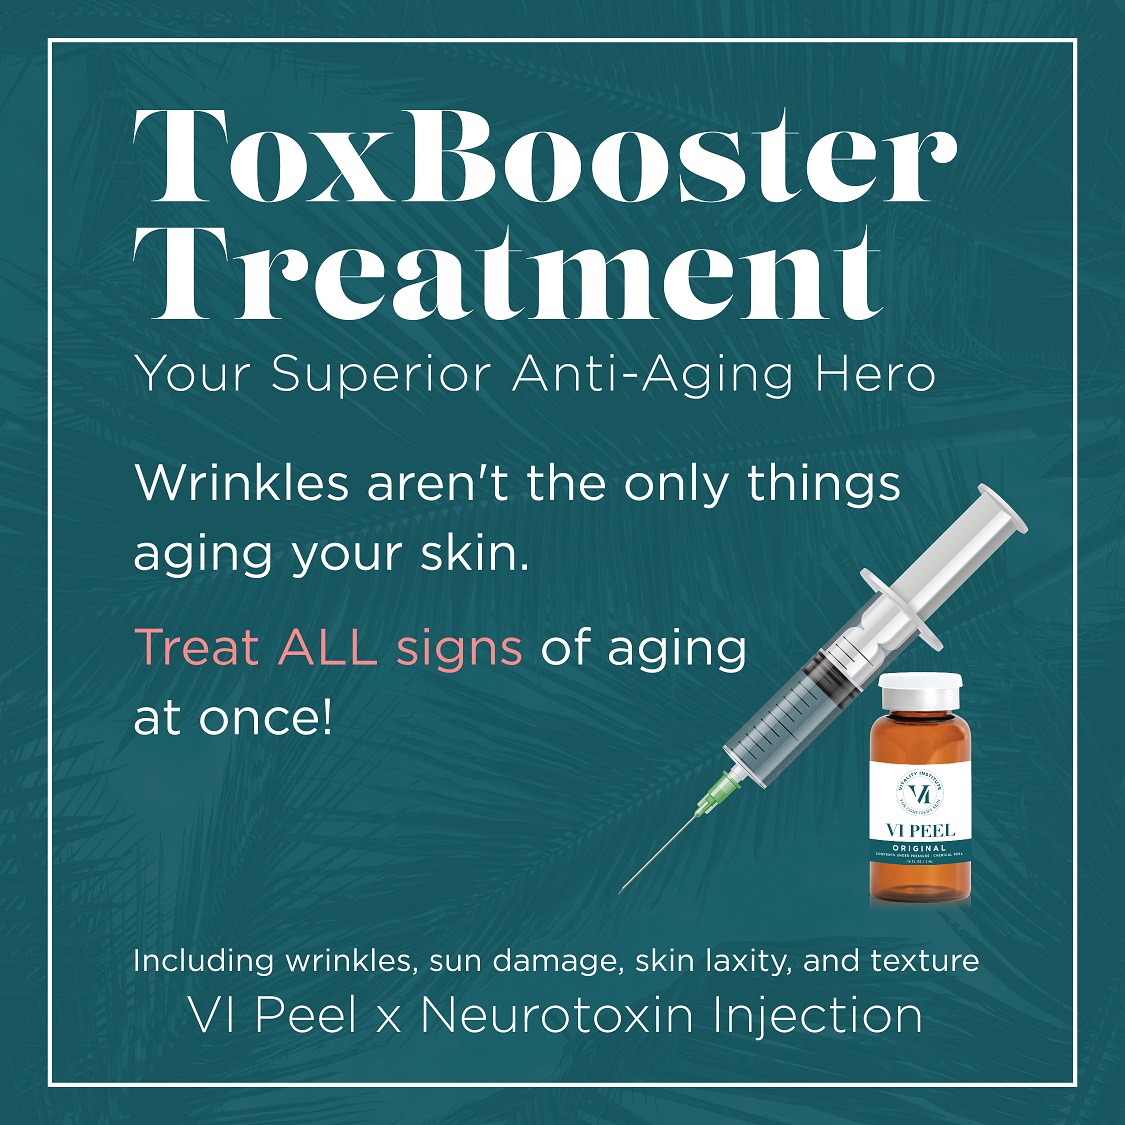 Toxbooster-Benefit-1-Post